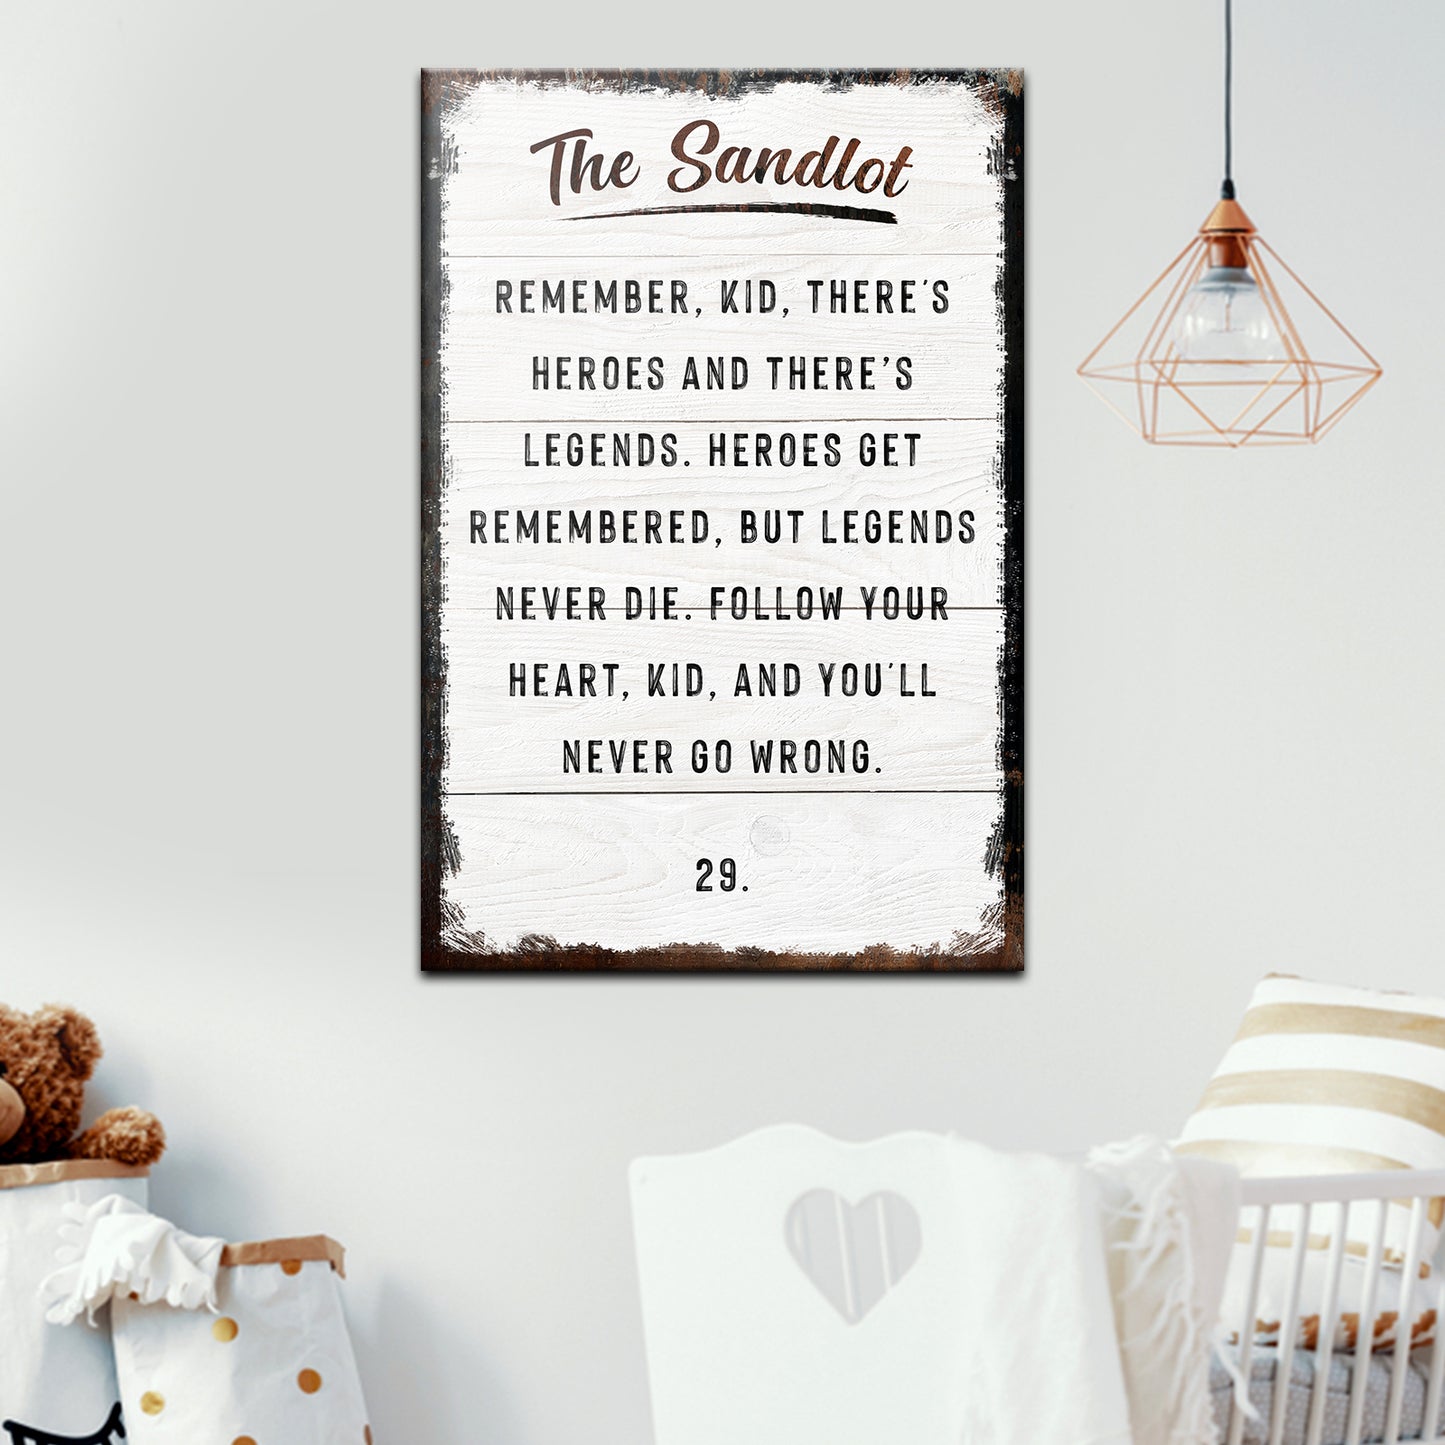 The Sandlot Sign Style 1 - Image by Tailored Canvases